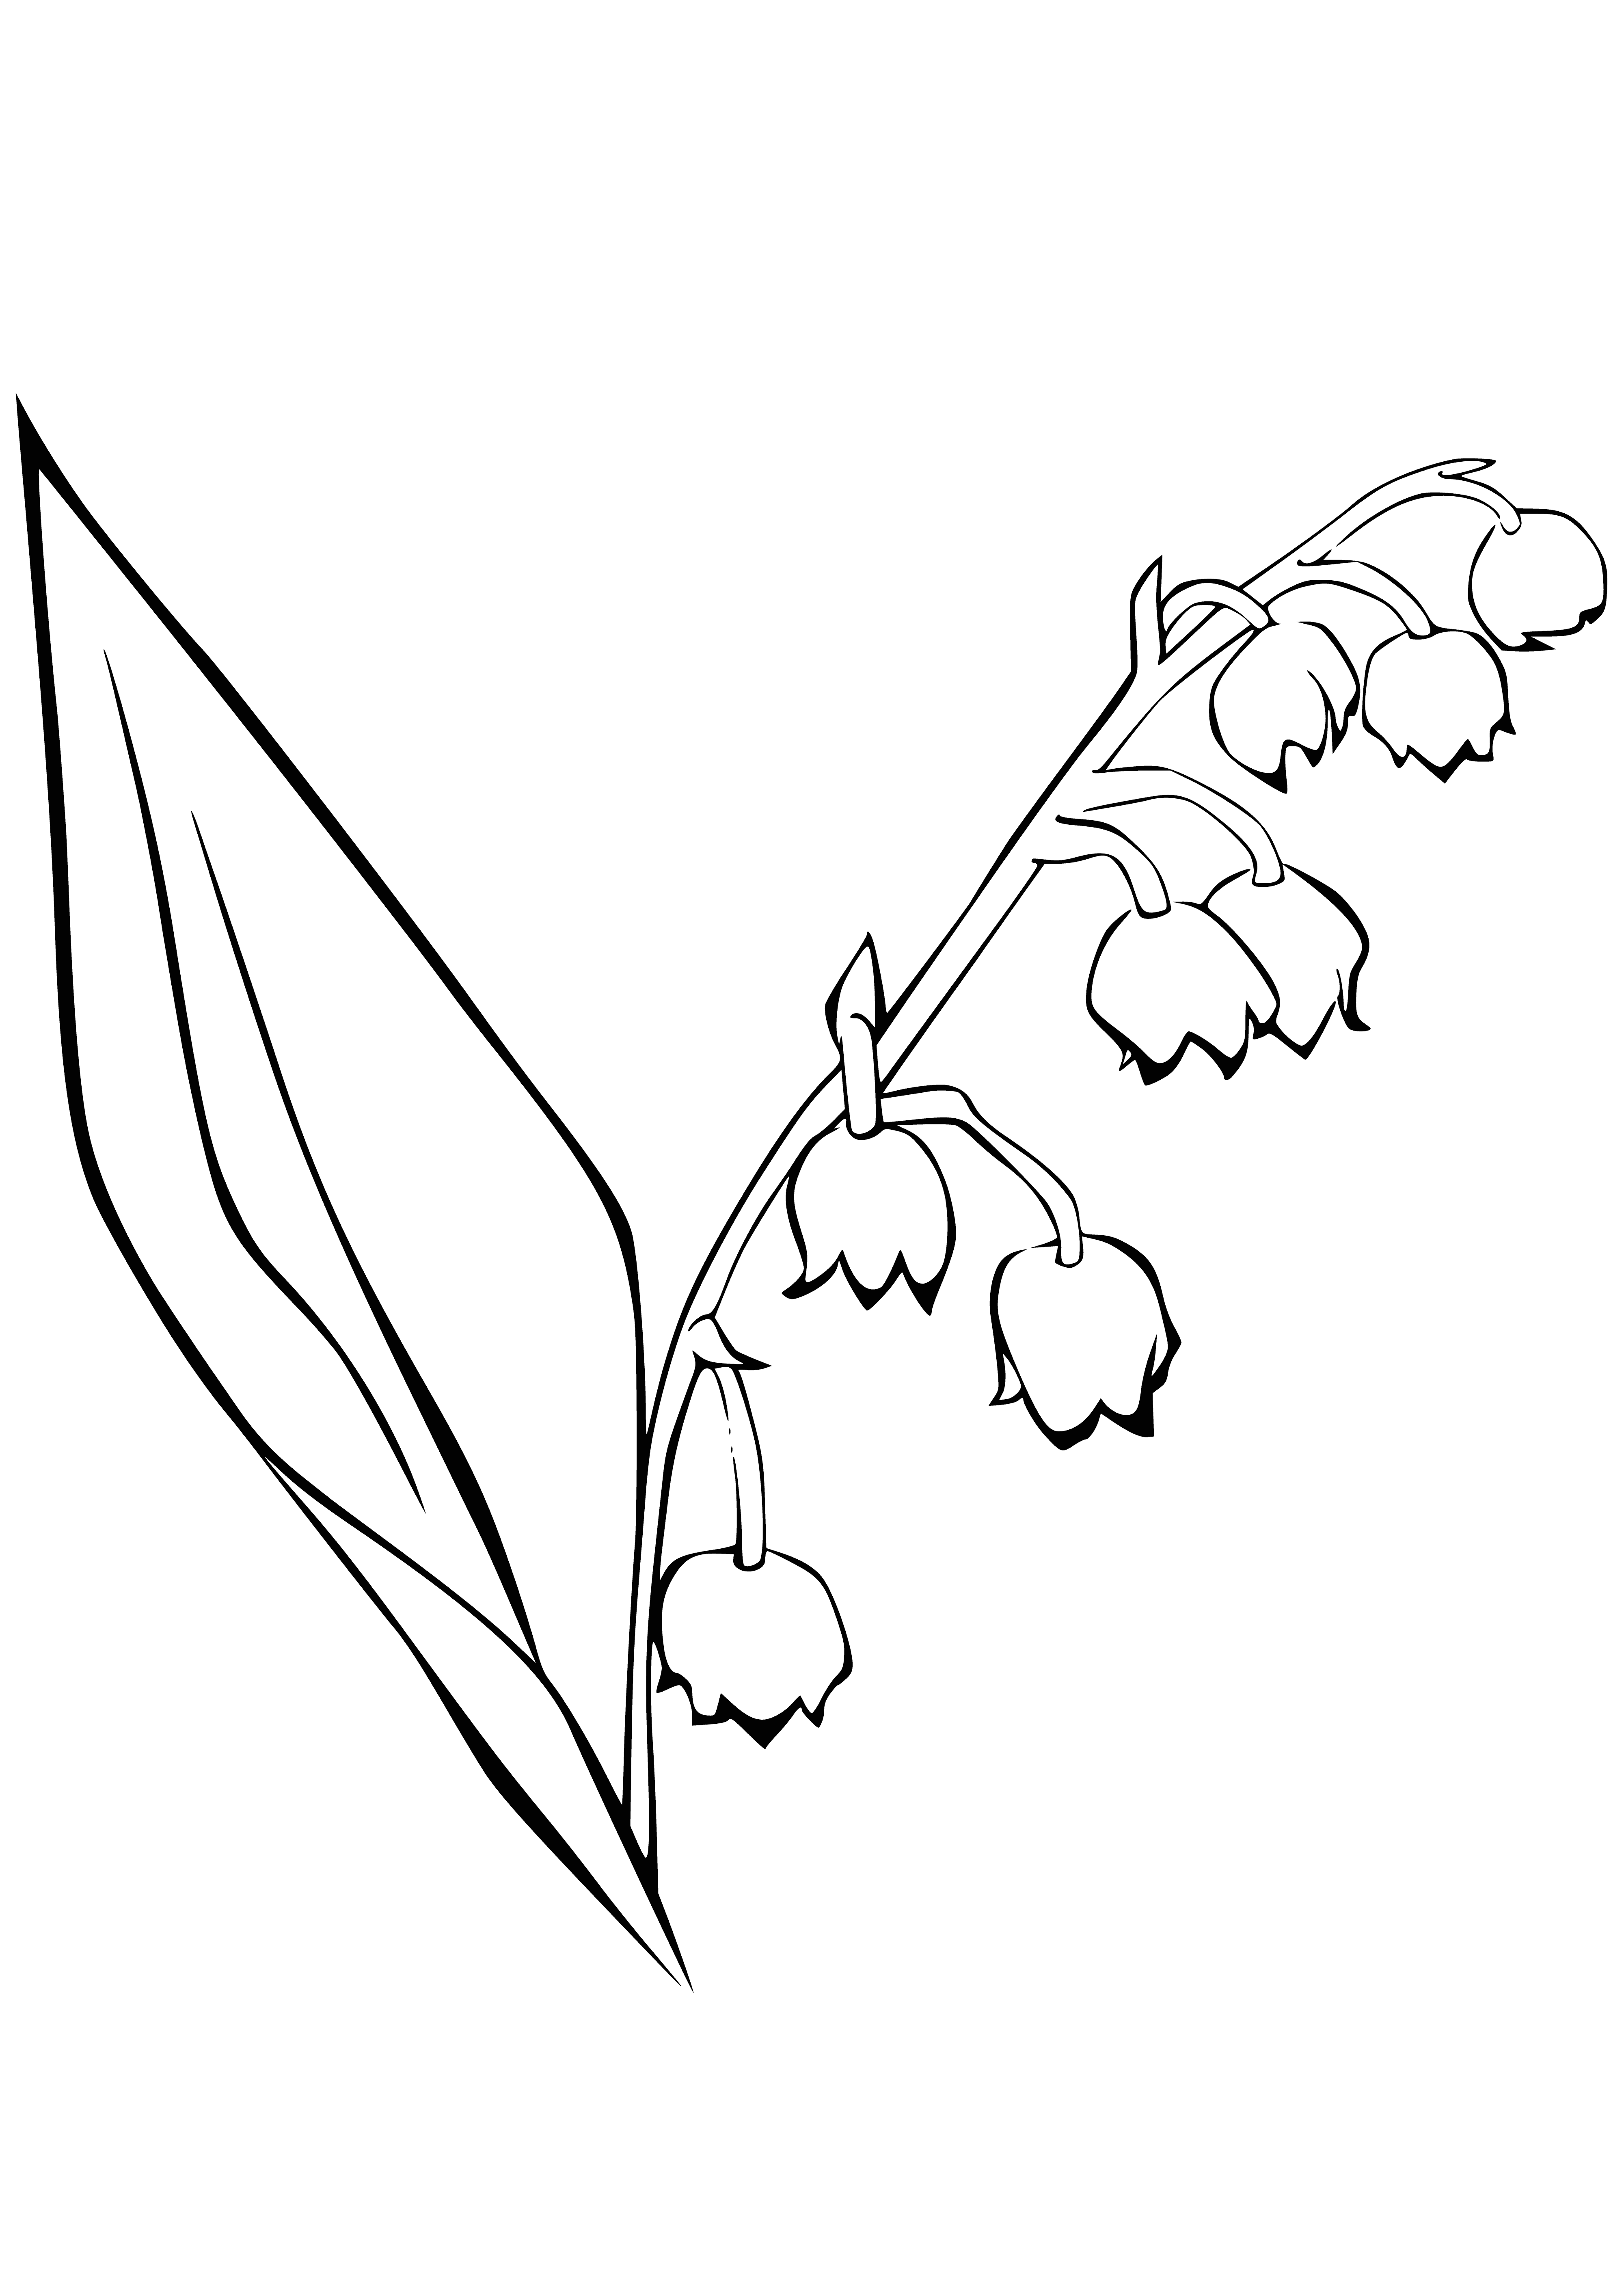 coloring page: A white lily surrounded by green leaves blooms with small white flowers in the center of this vibrant coloring page. #Coloring